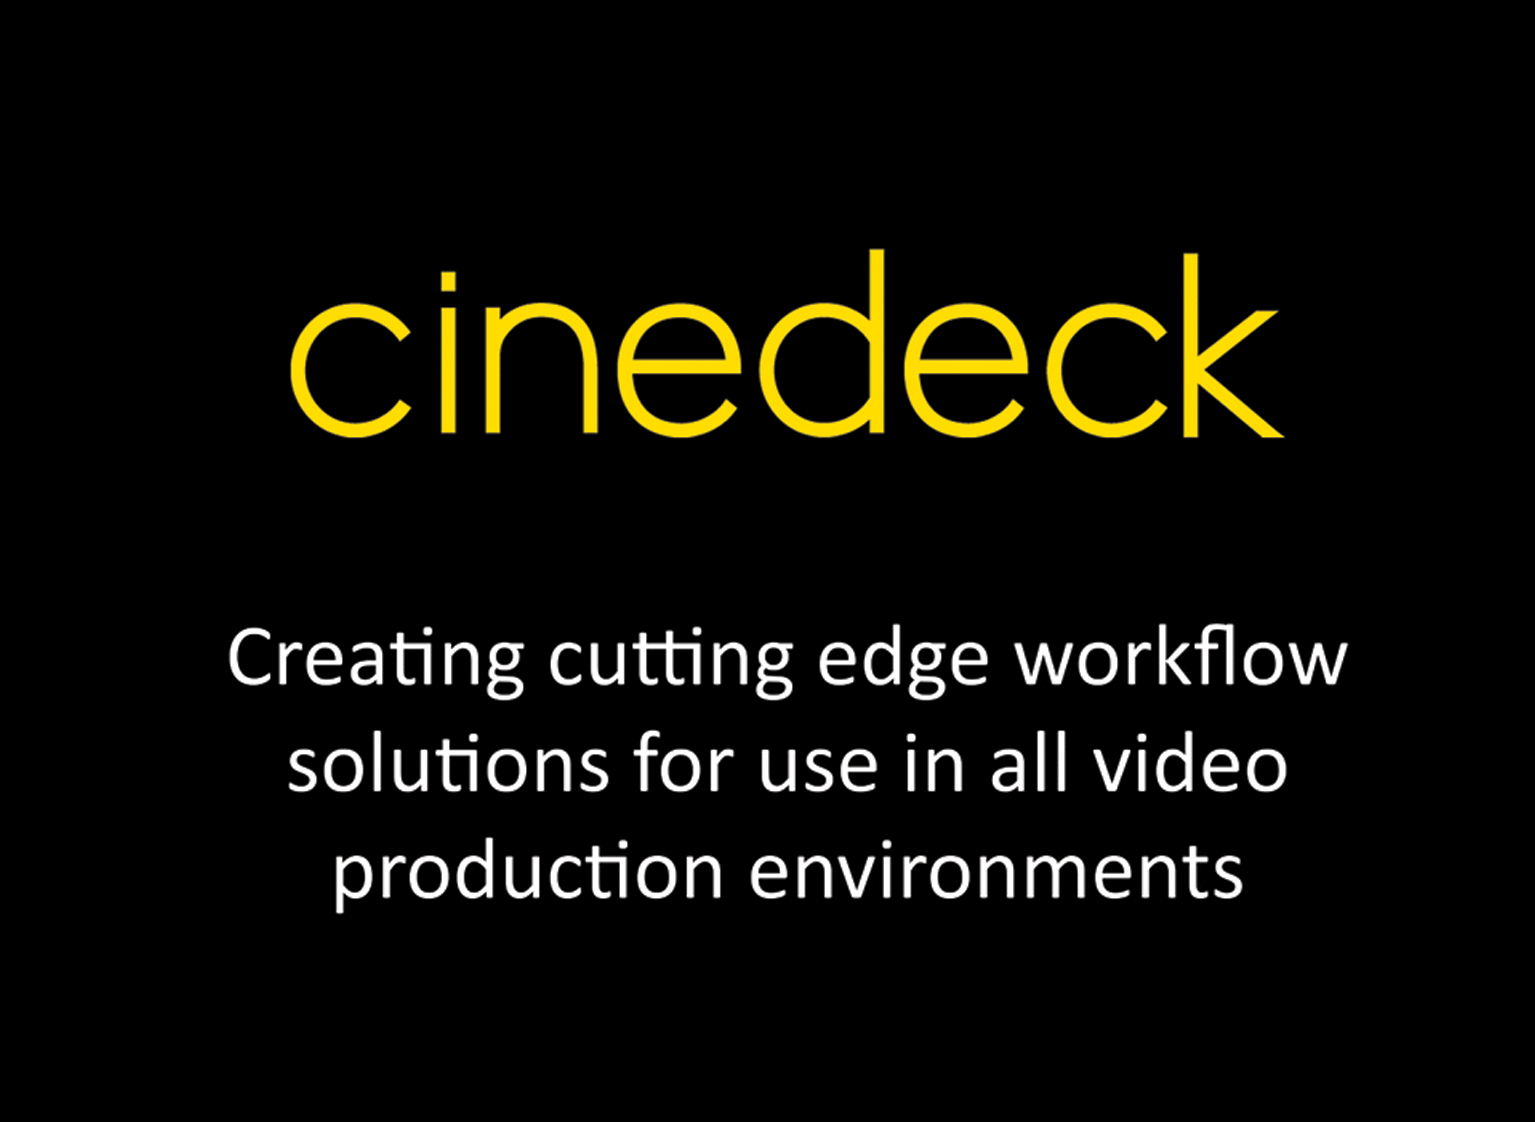 Plan Your Visit to BVE 2018: What To See: Cinedeck